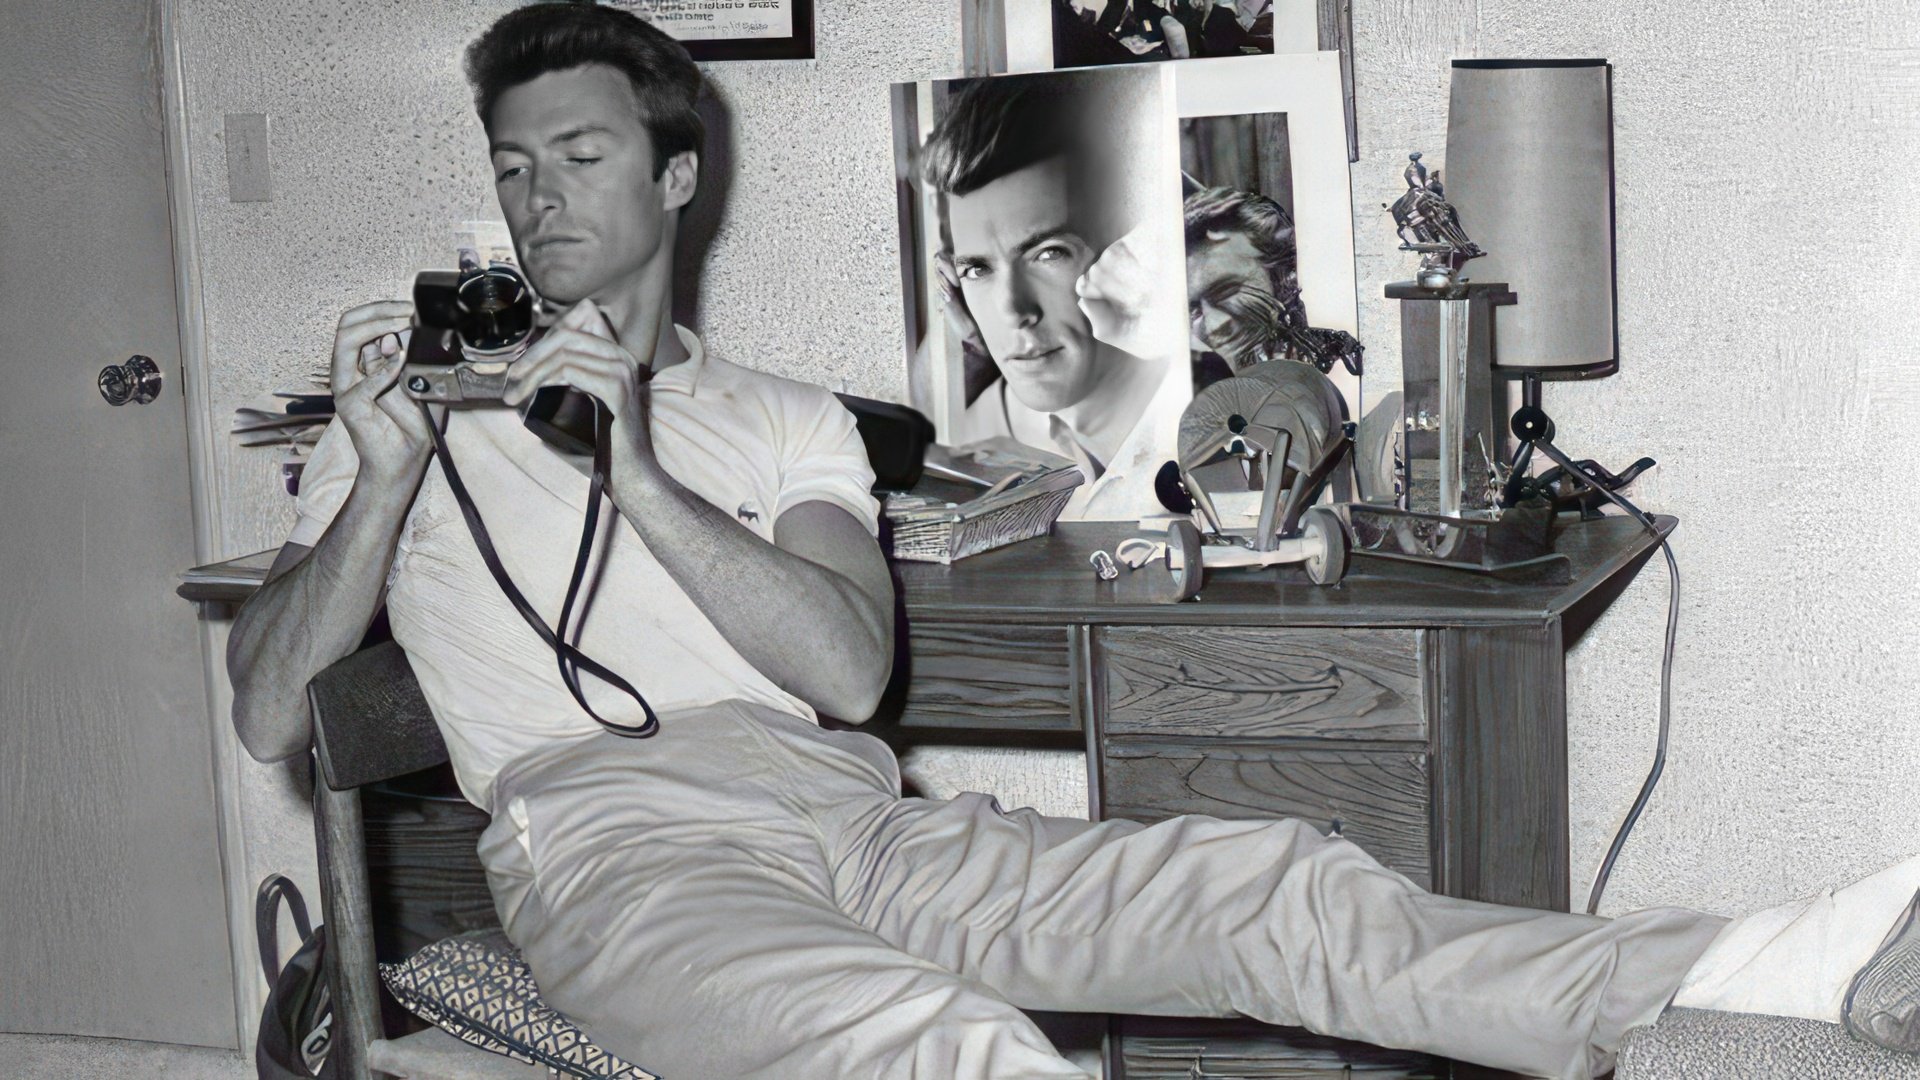 Clint Eastwood was clearly aware of his desire to become an actor